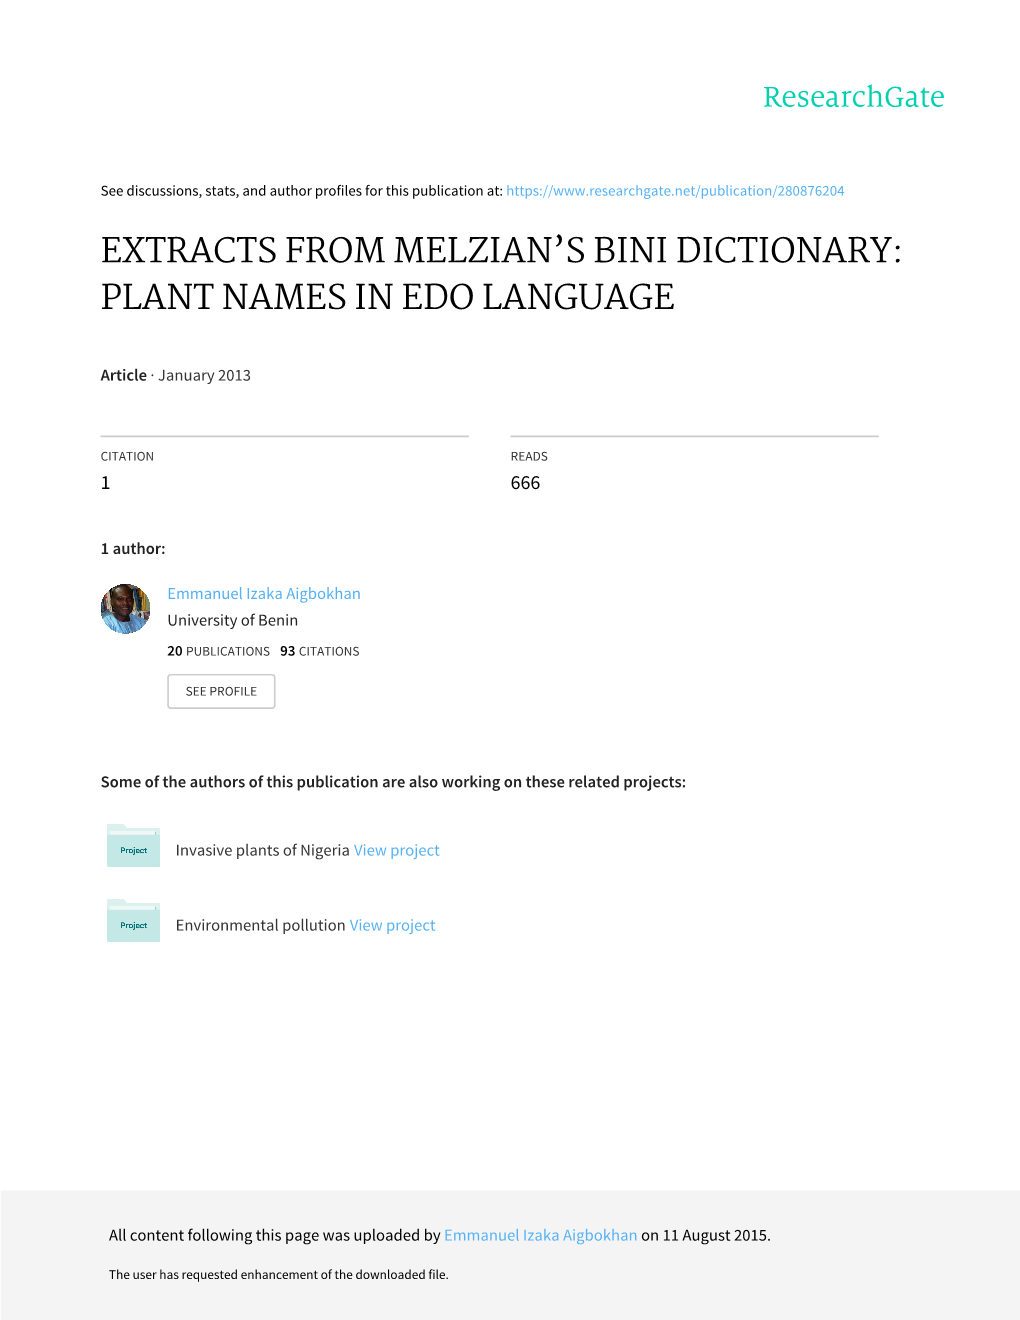 Extracts from Melzian's Bini Dictionary: Plant Names In